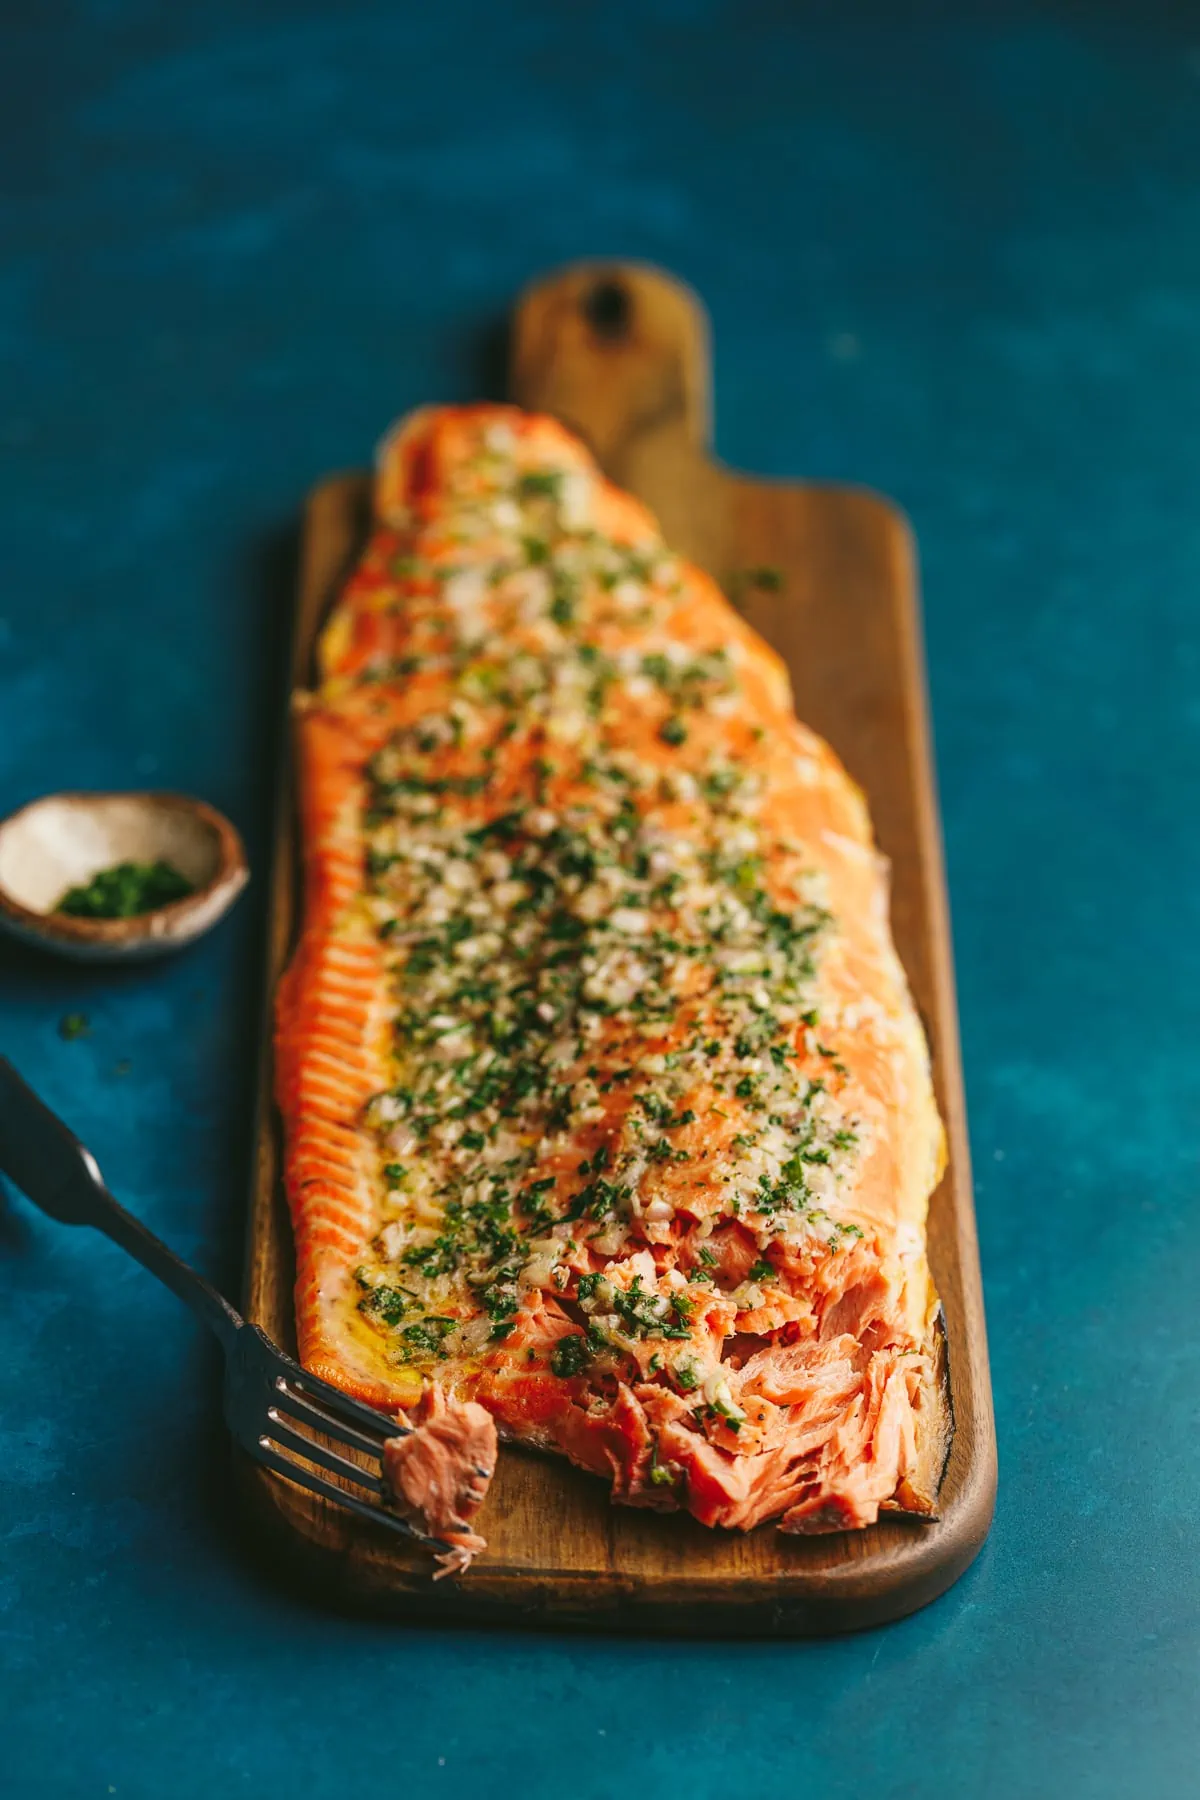 A whole grilled salmon fillet on a wooden cutting board with a fork.